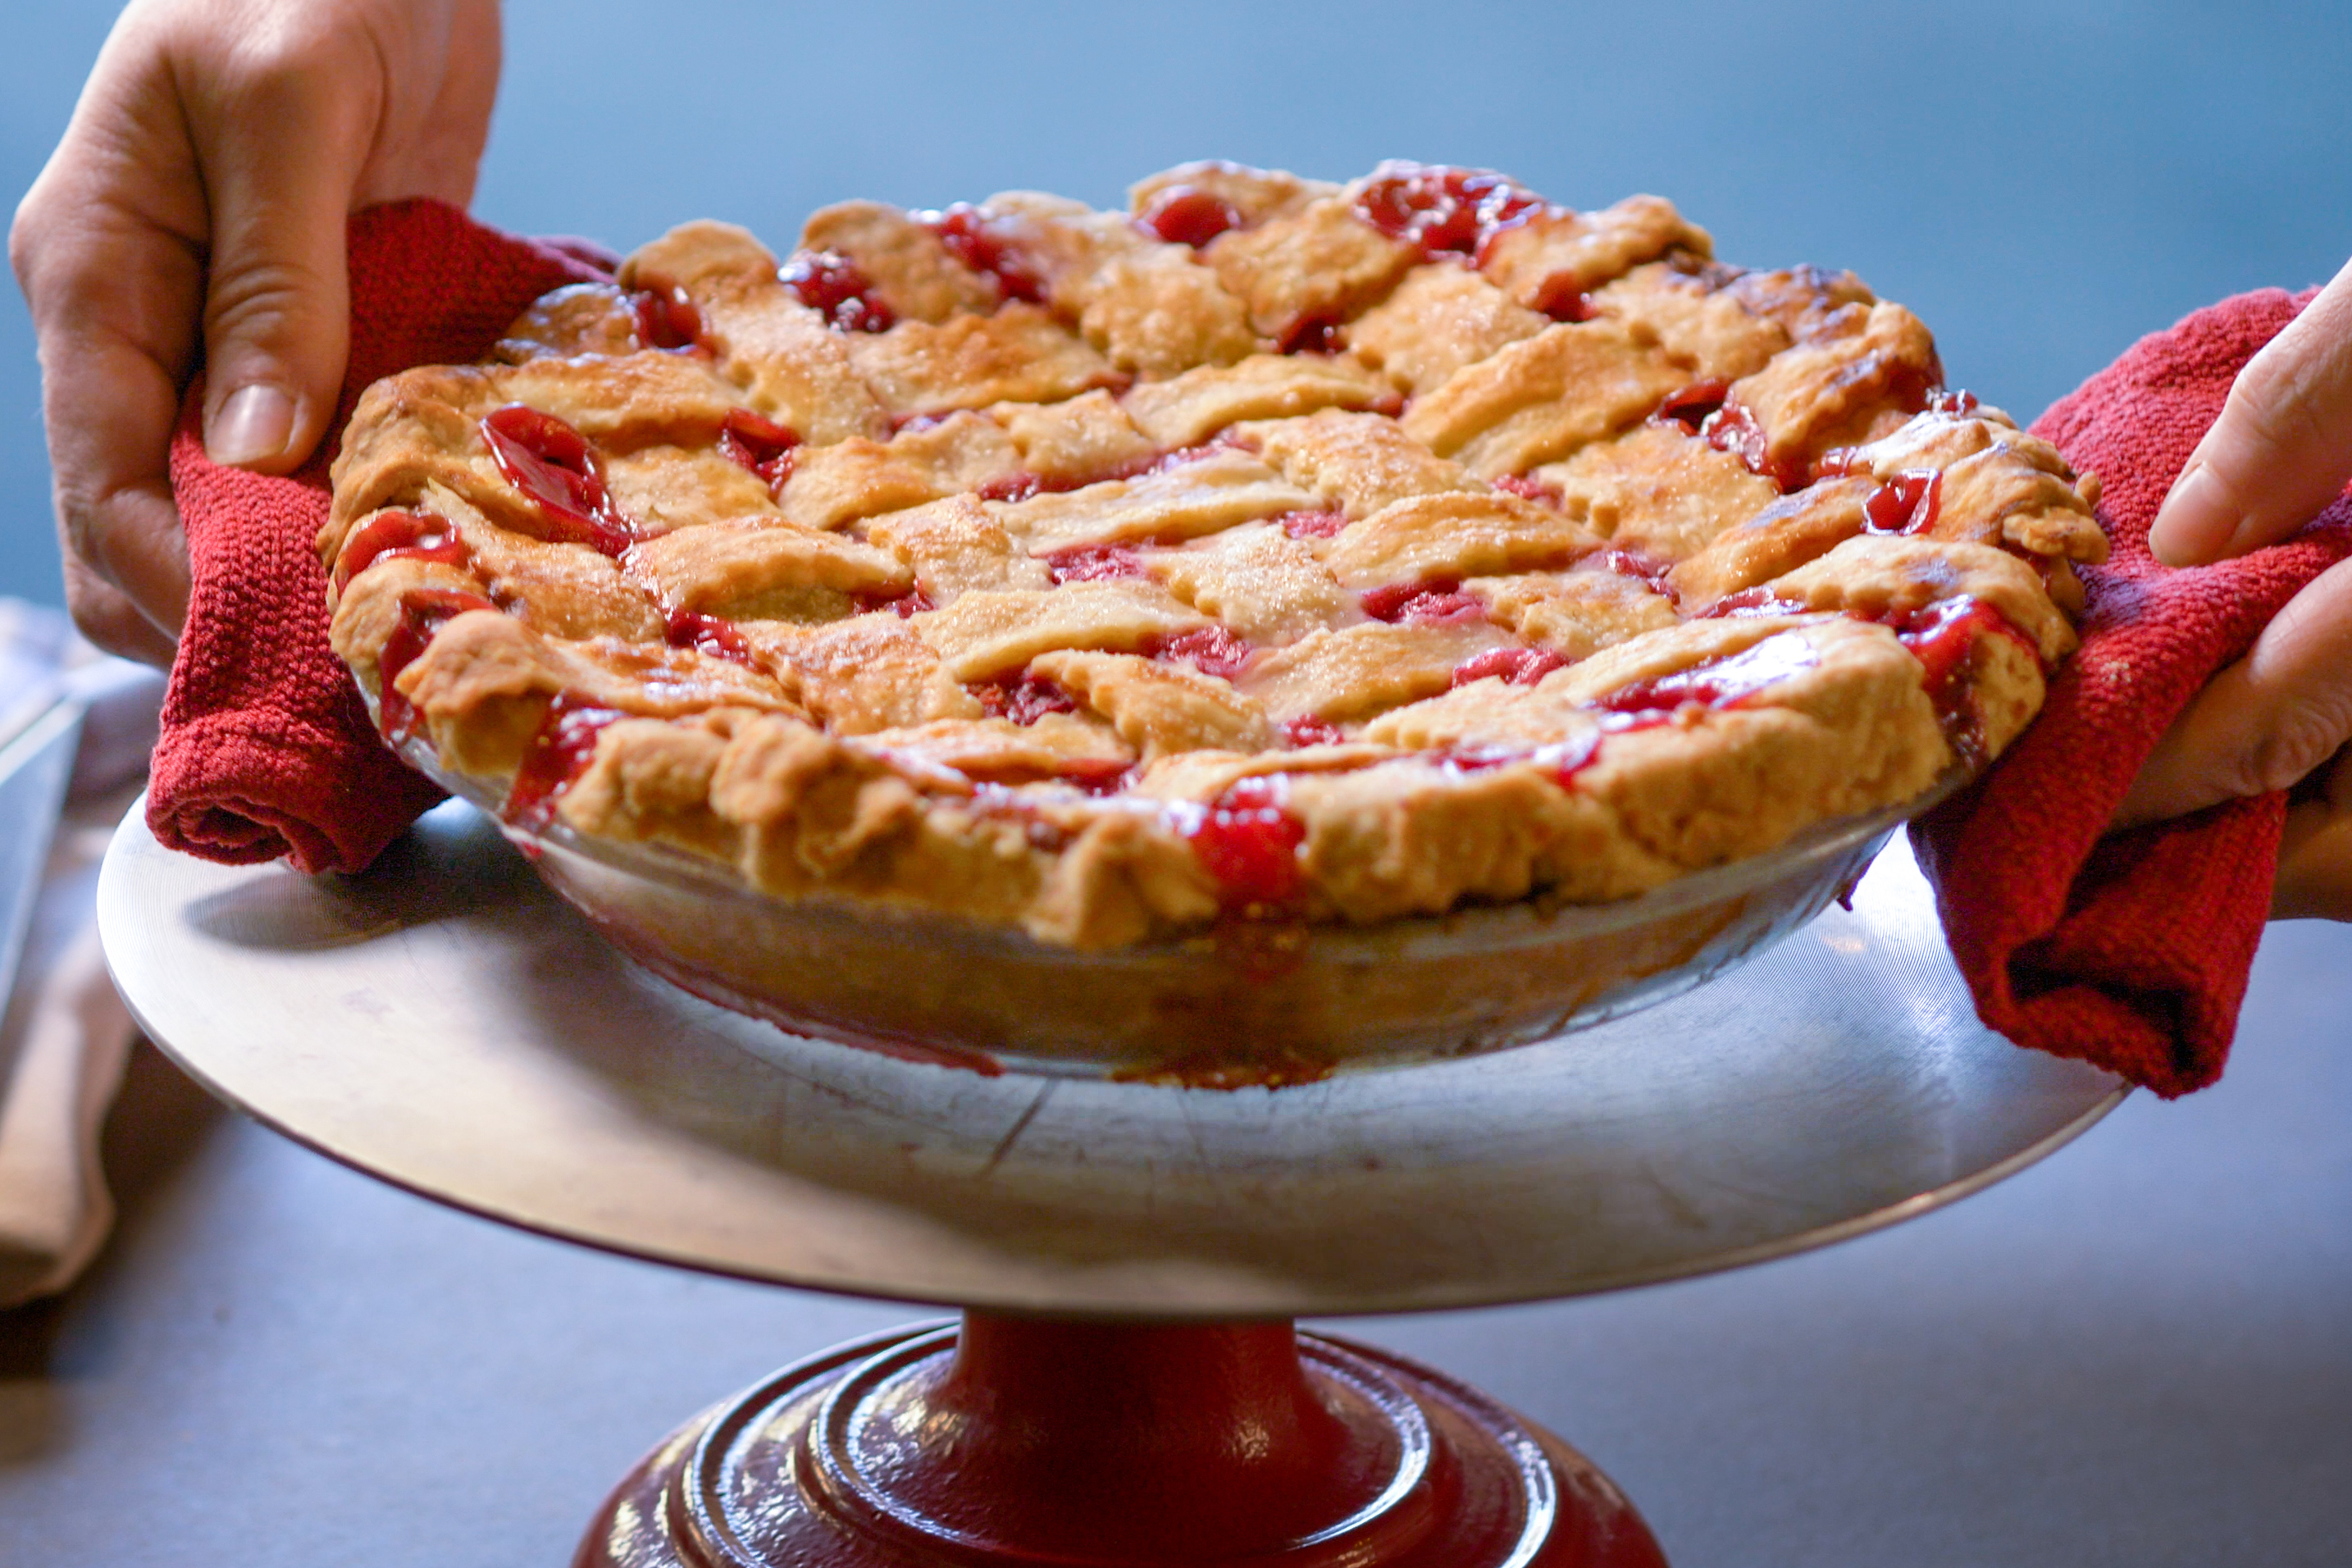 The Best Pie Dishes in 2023